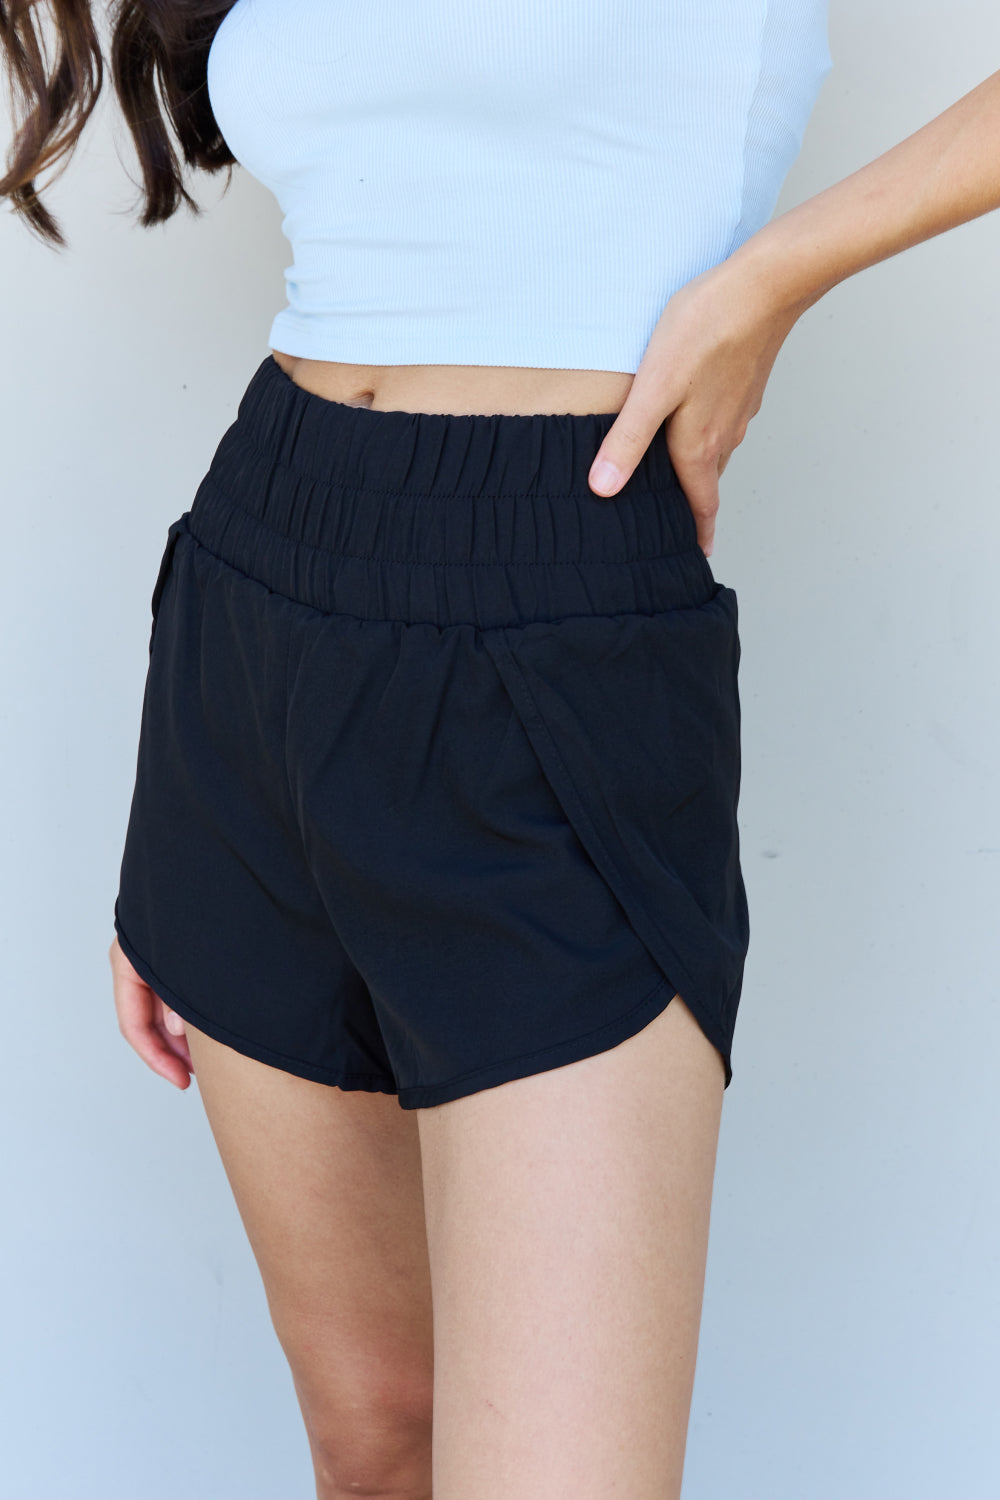 Ninexis Stay Active High Waistband Active Shorts in Black - Crazy Like a Daisy Boutique #